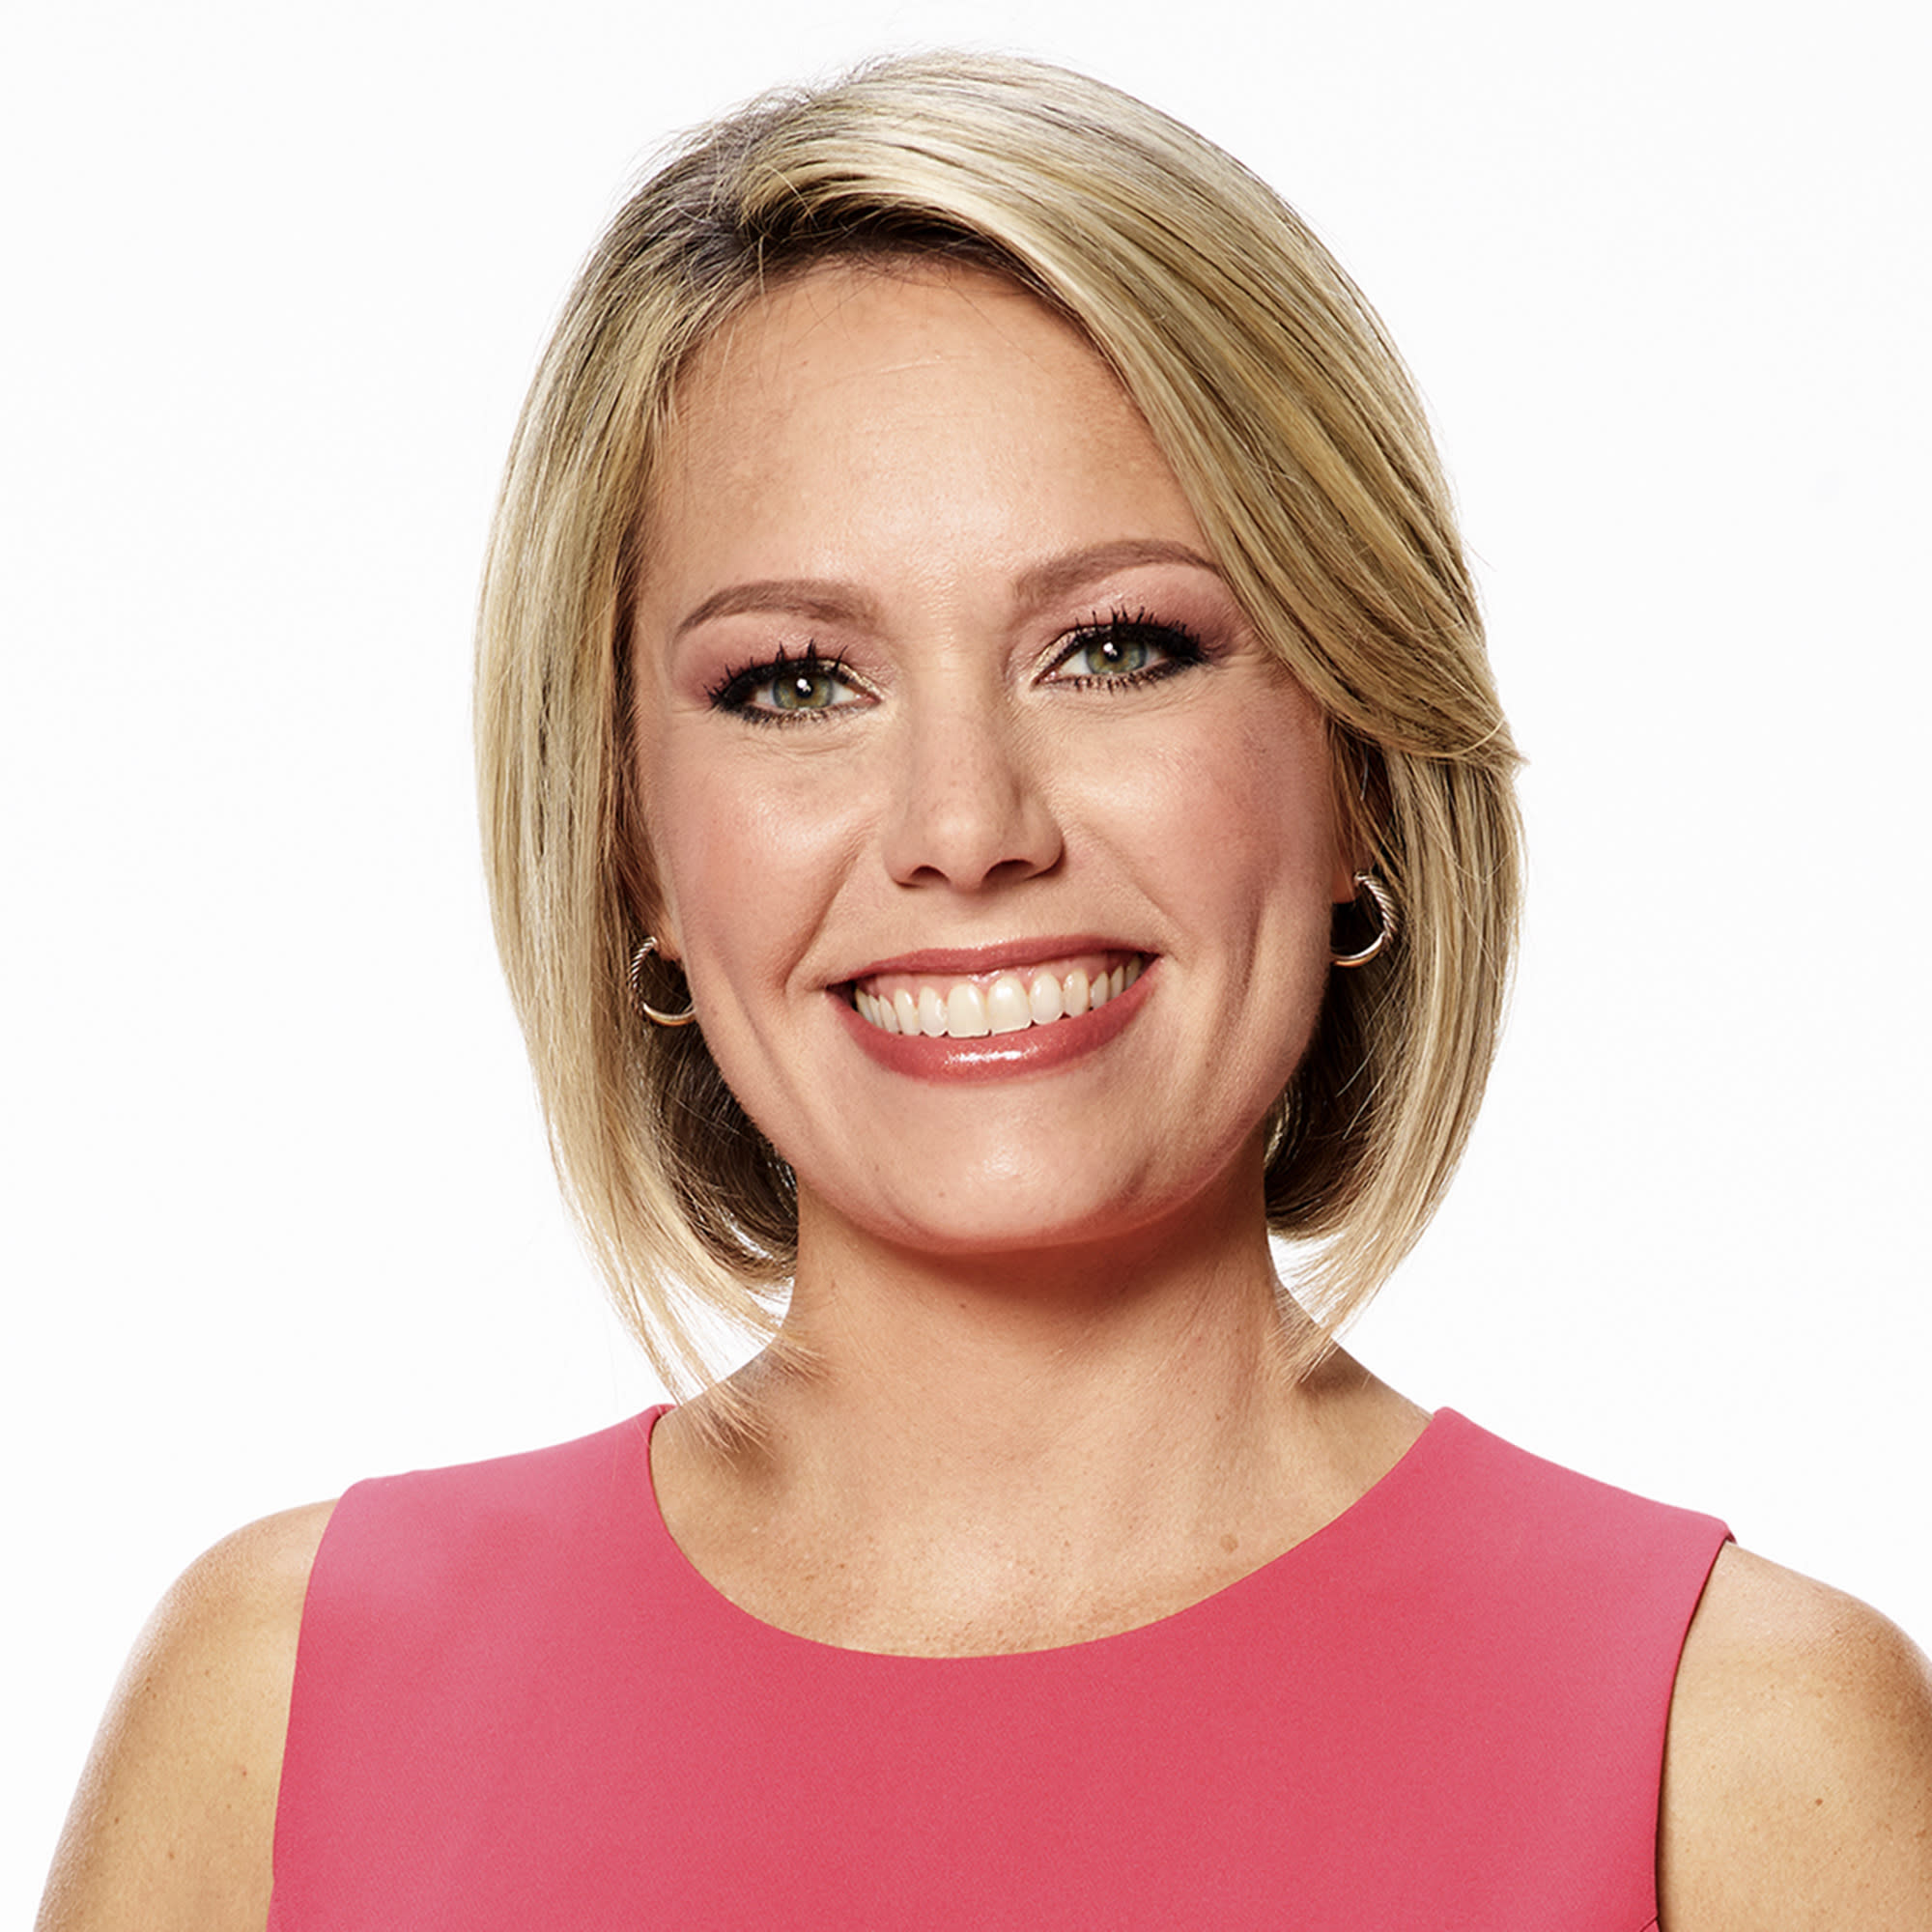 dylan-dreyer-weather-anchor-for-weekend-today-co-host-of-3rd-hour-of